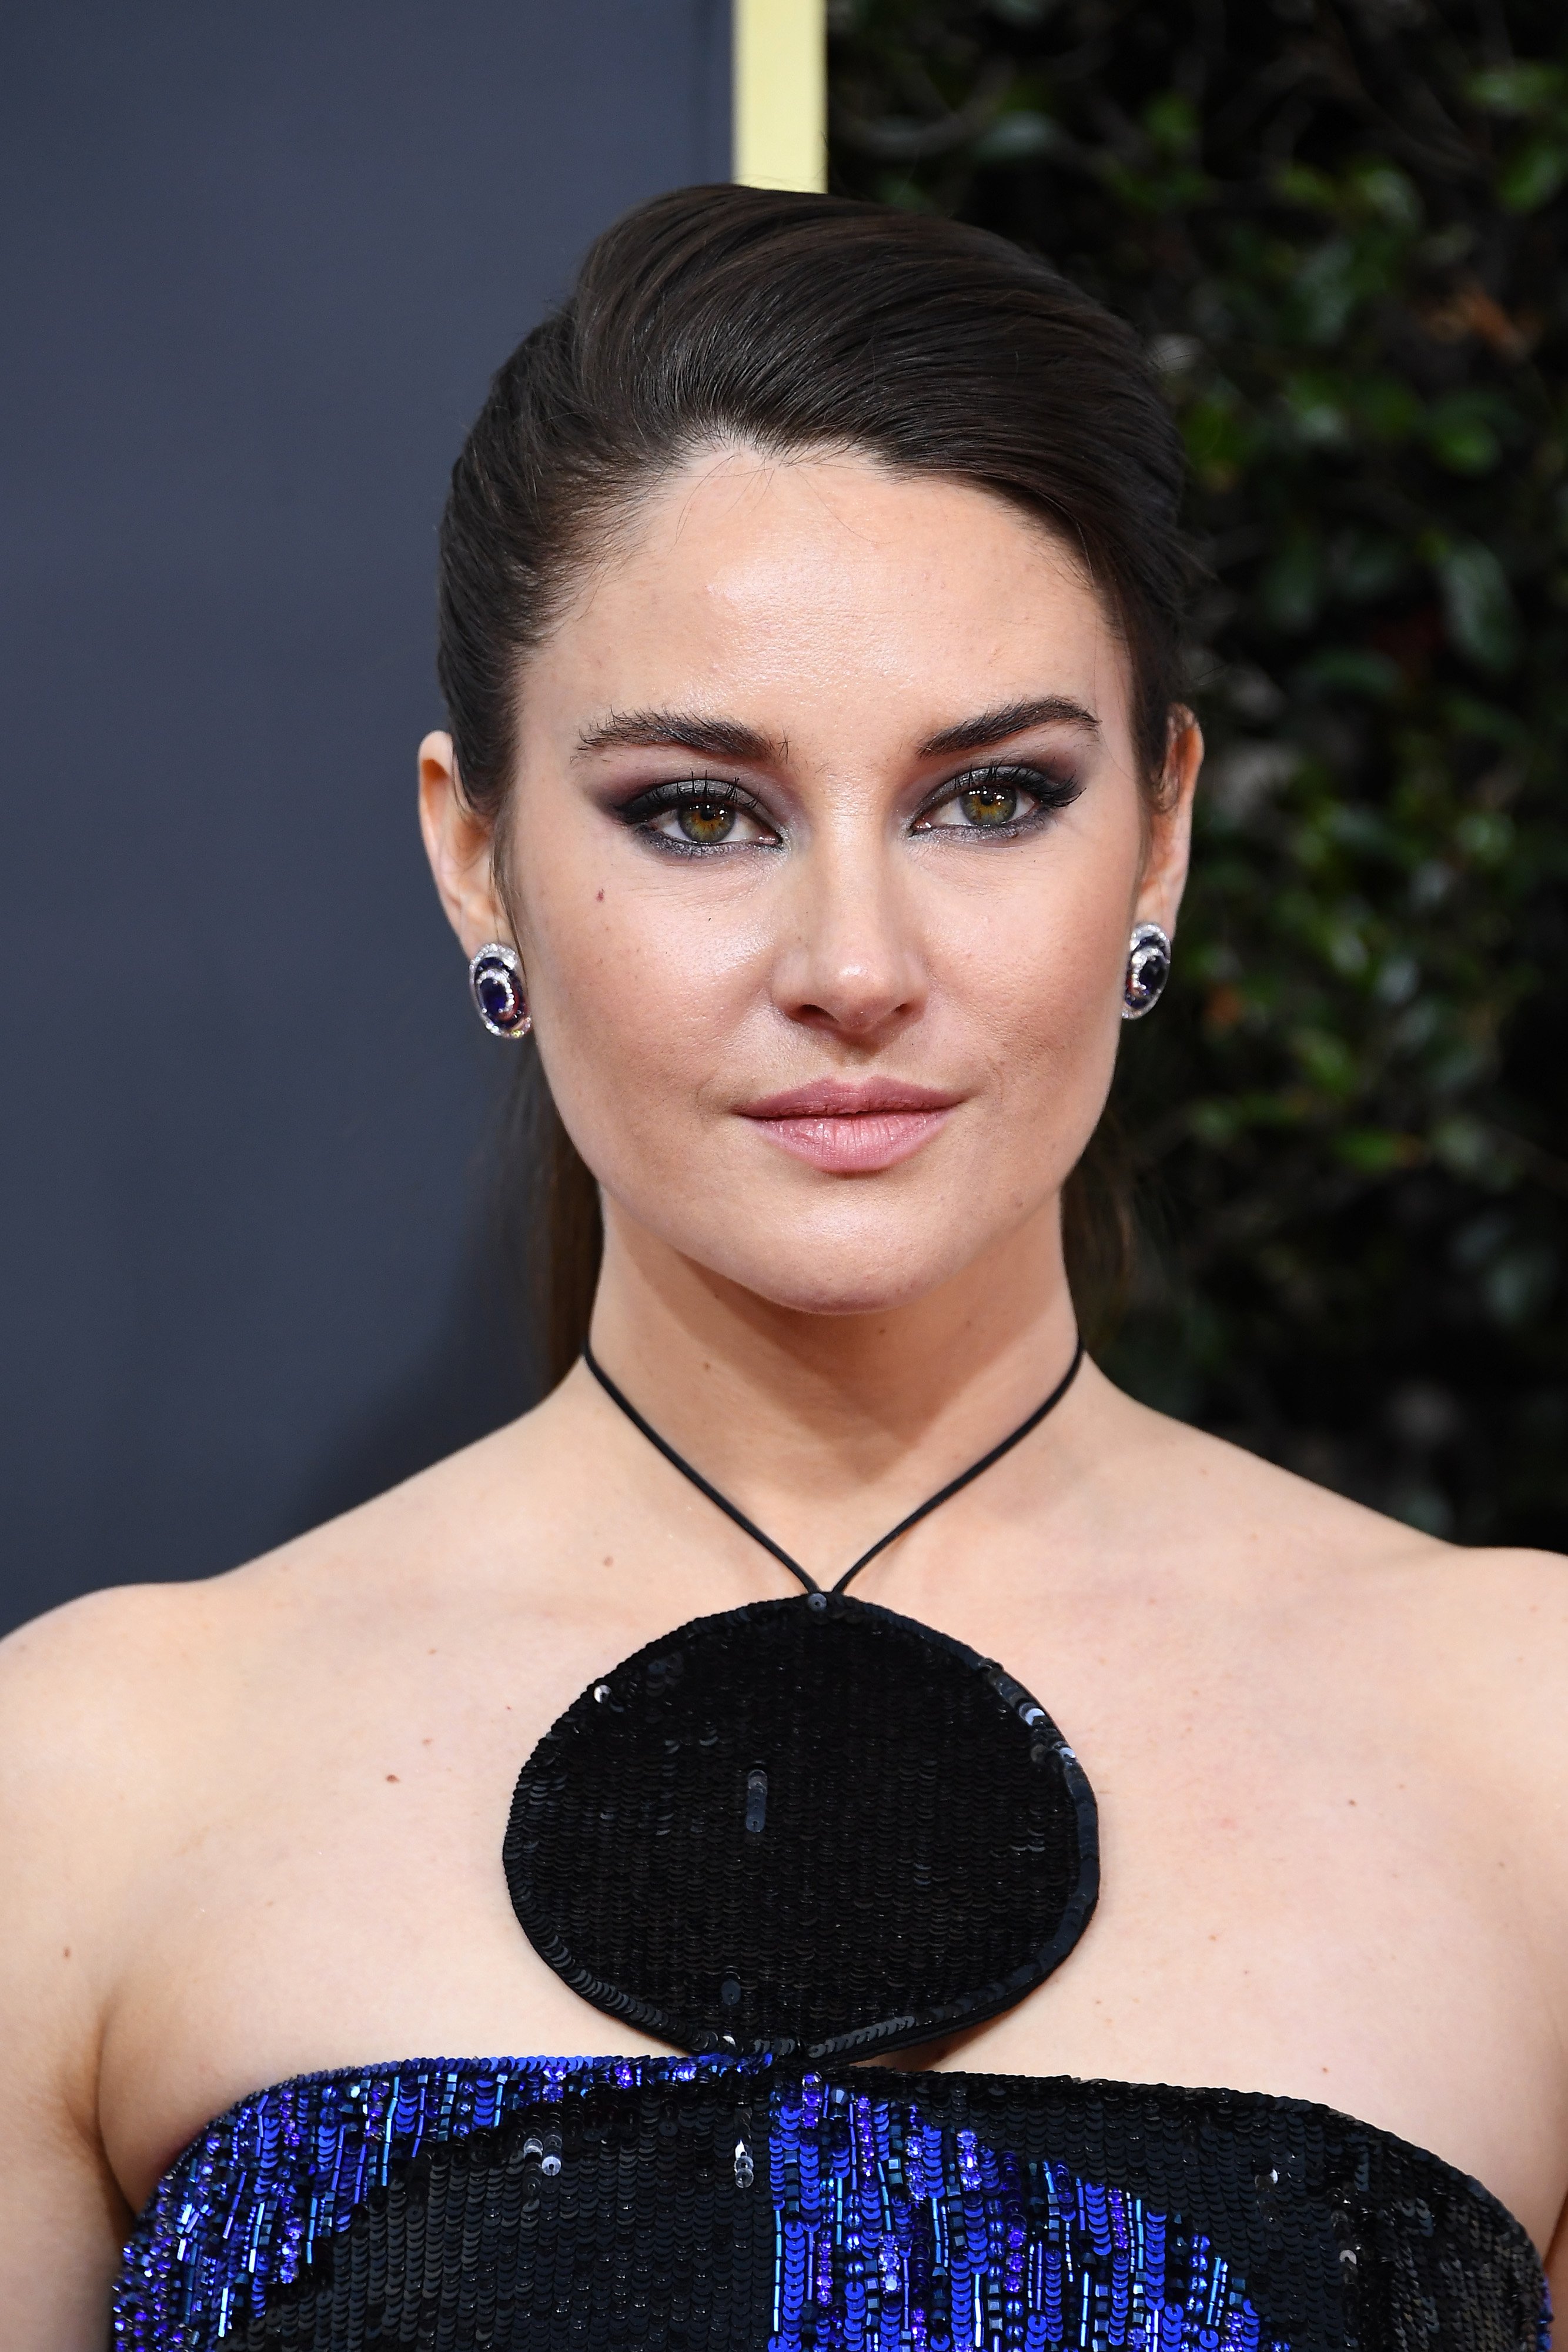 Shailene Woodley attends the 77th Annual Golden Globe Awards at The Beverly Hilton Hotel on January 05, 2020 in Beverly Hills, California. | Source: Getty Images